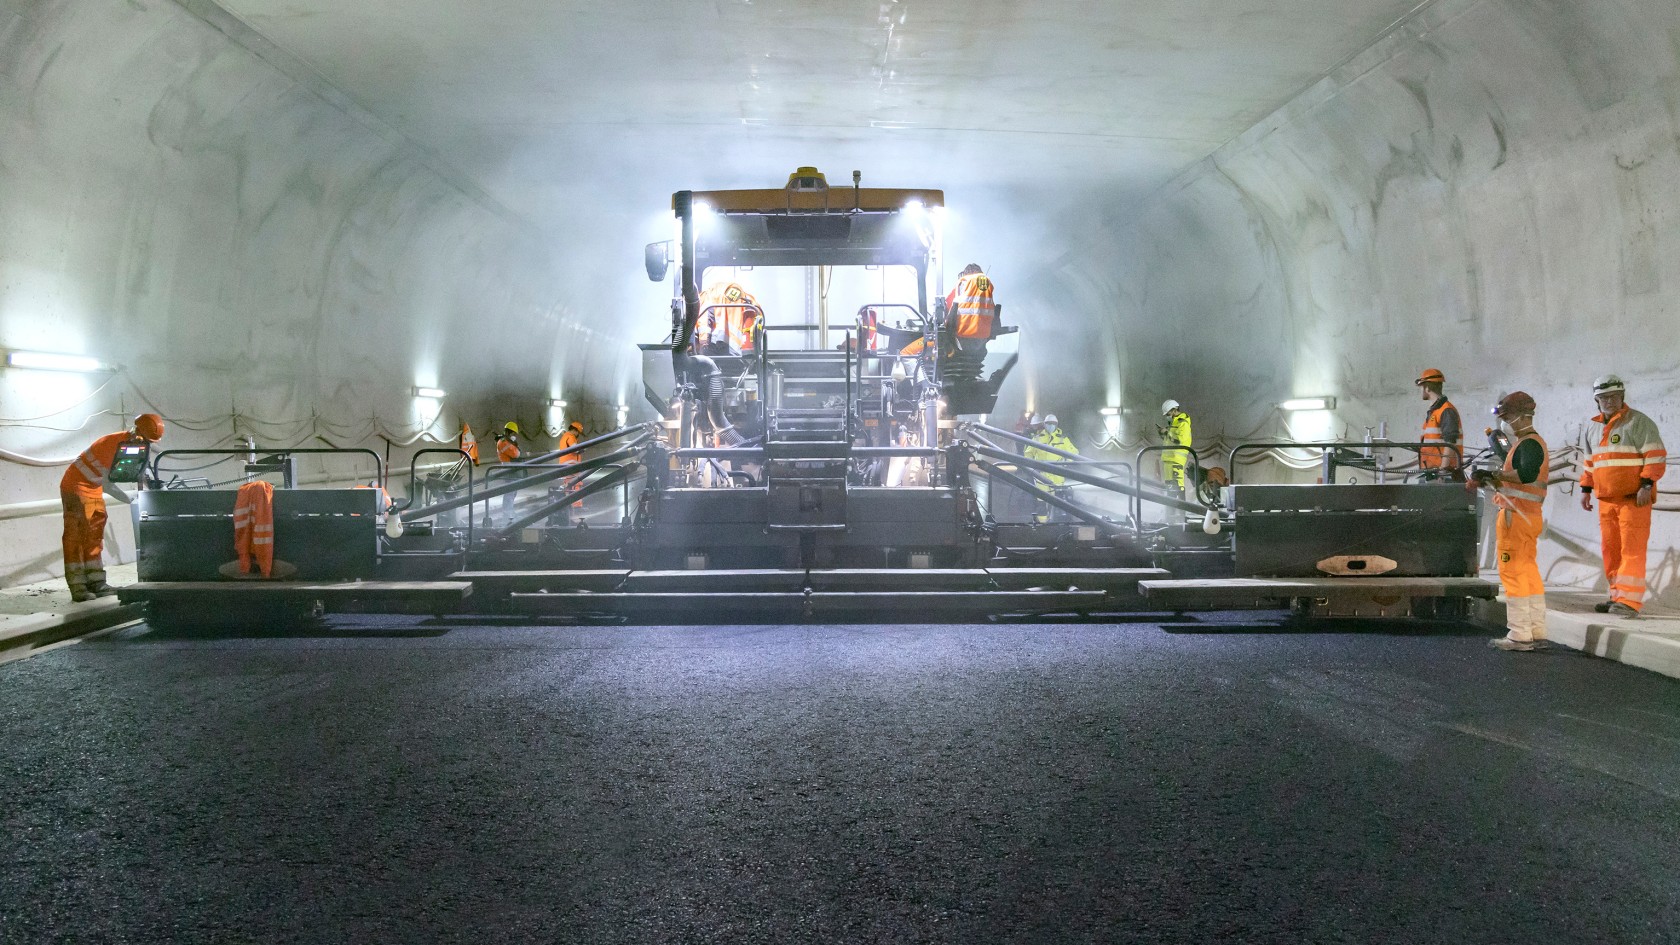 Paving without joints in the widest tunnel in Switzerland using Vögele’s SUPER 2100-3i Road Paver.